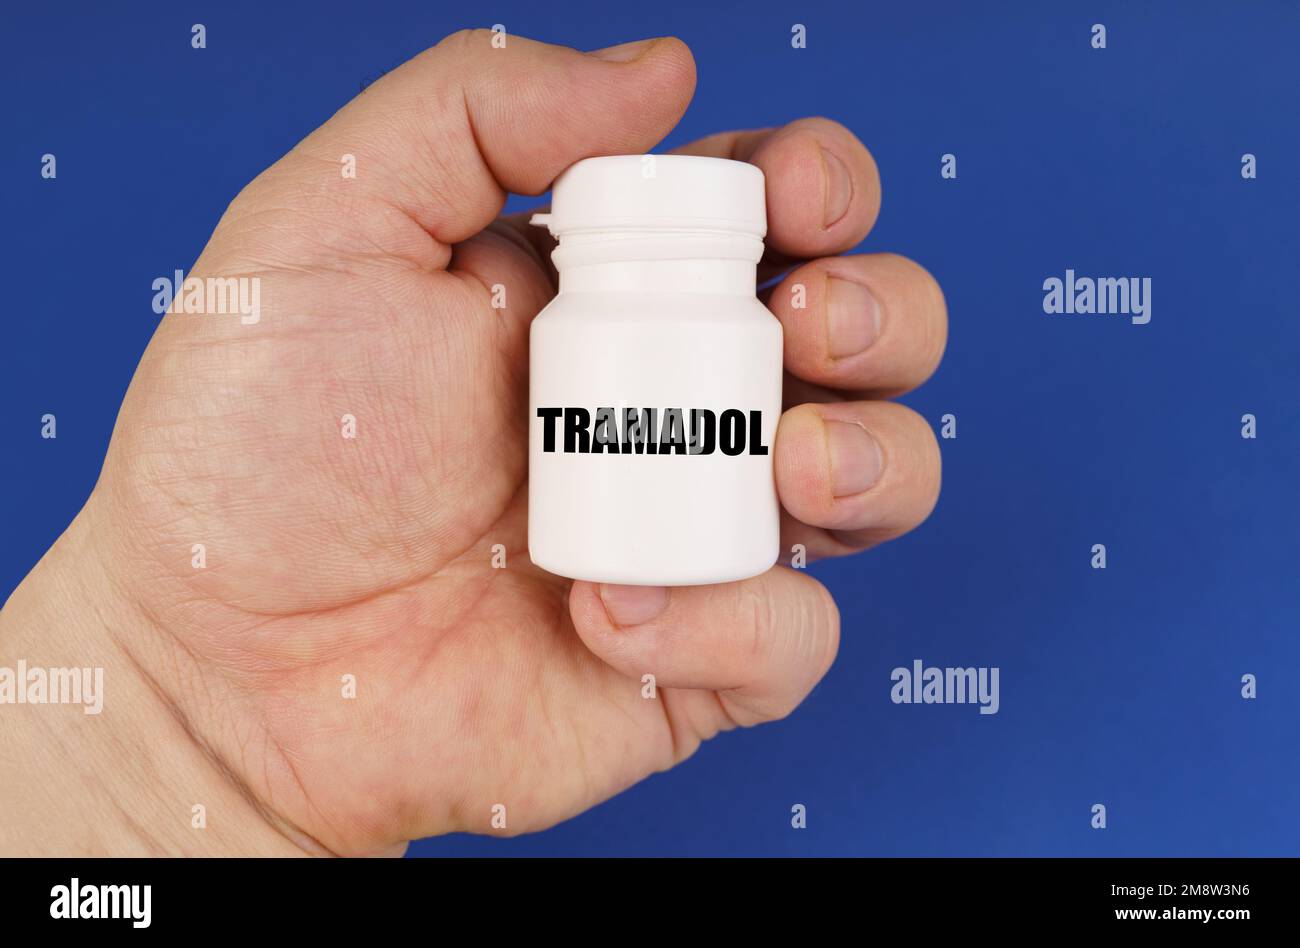 Pharmacology concept. On a blue background in the hands of a man is a white jar with the inscription - Tramadol Stock Photo